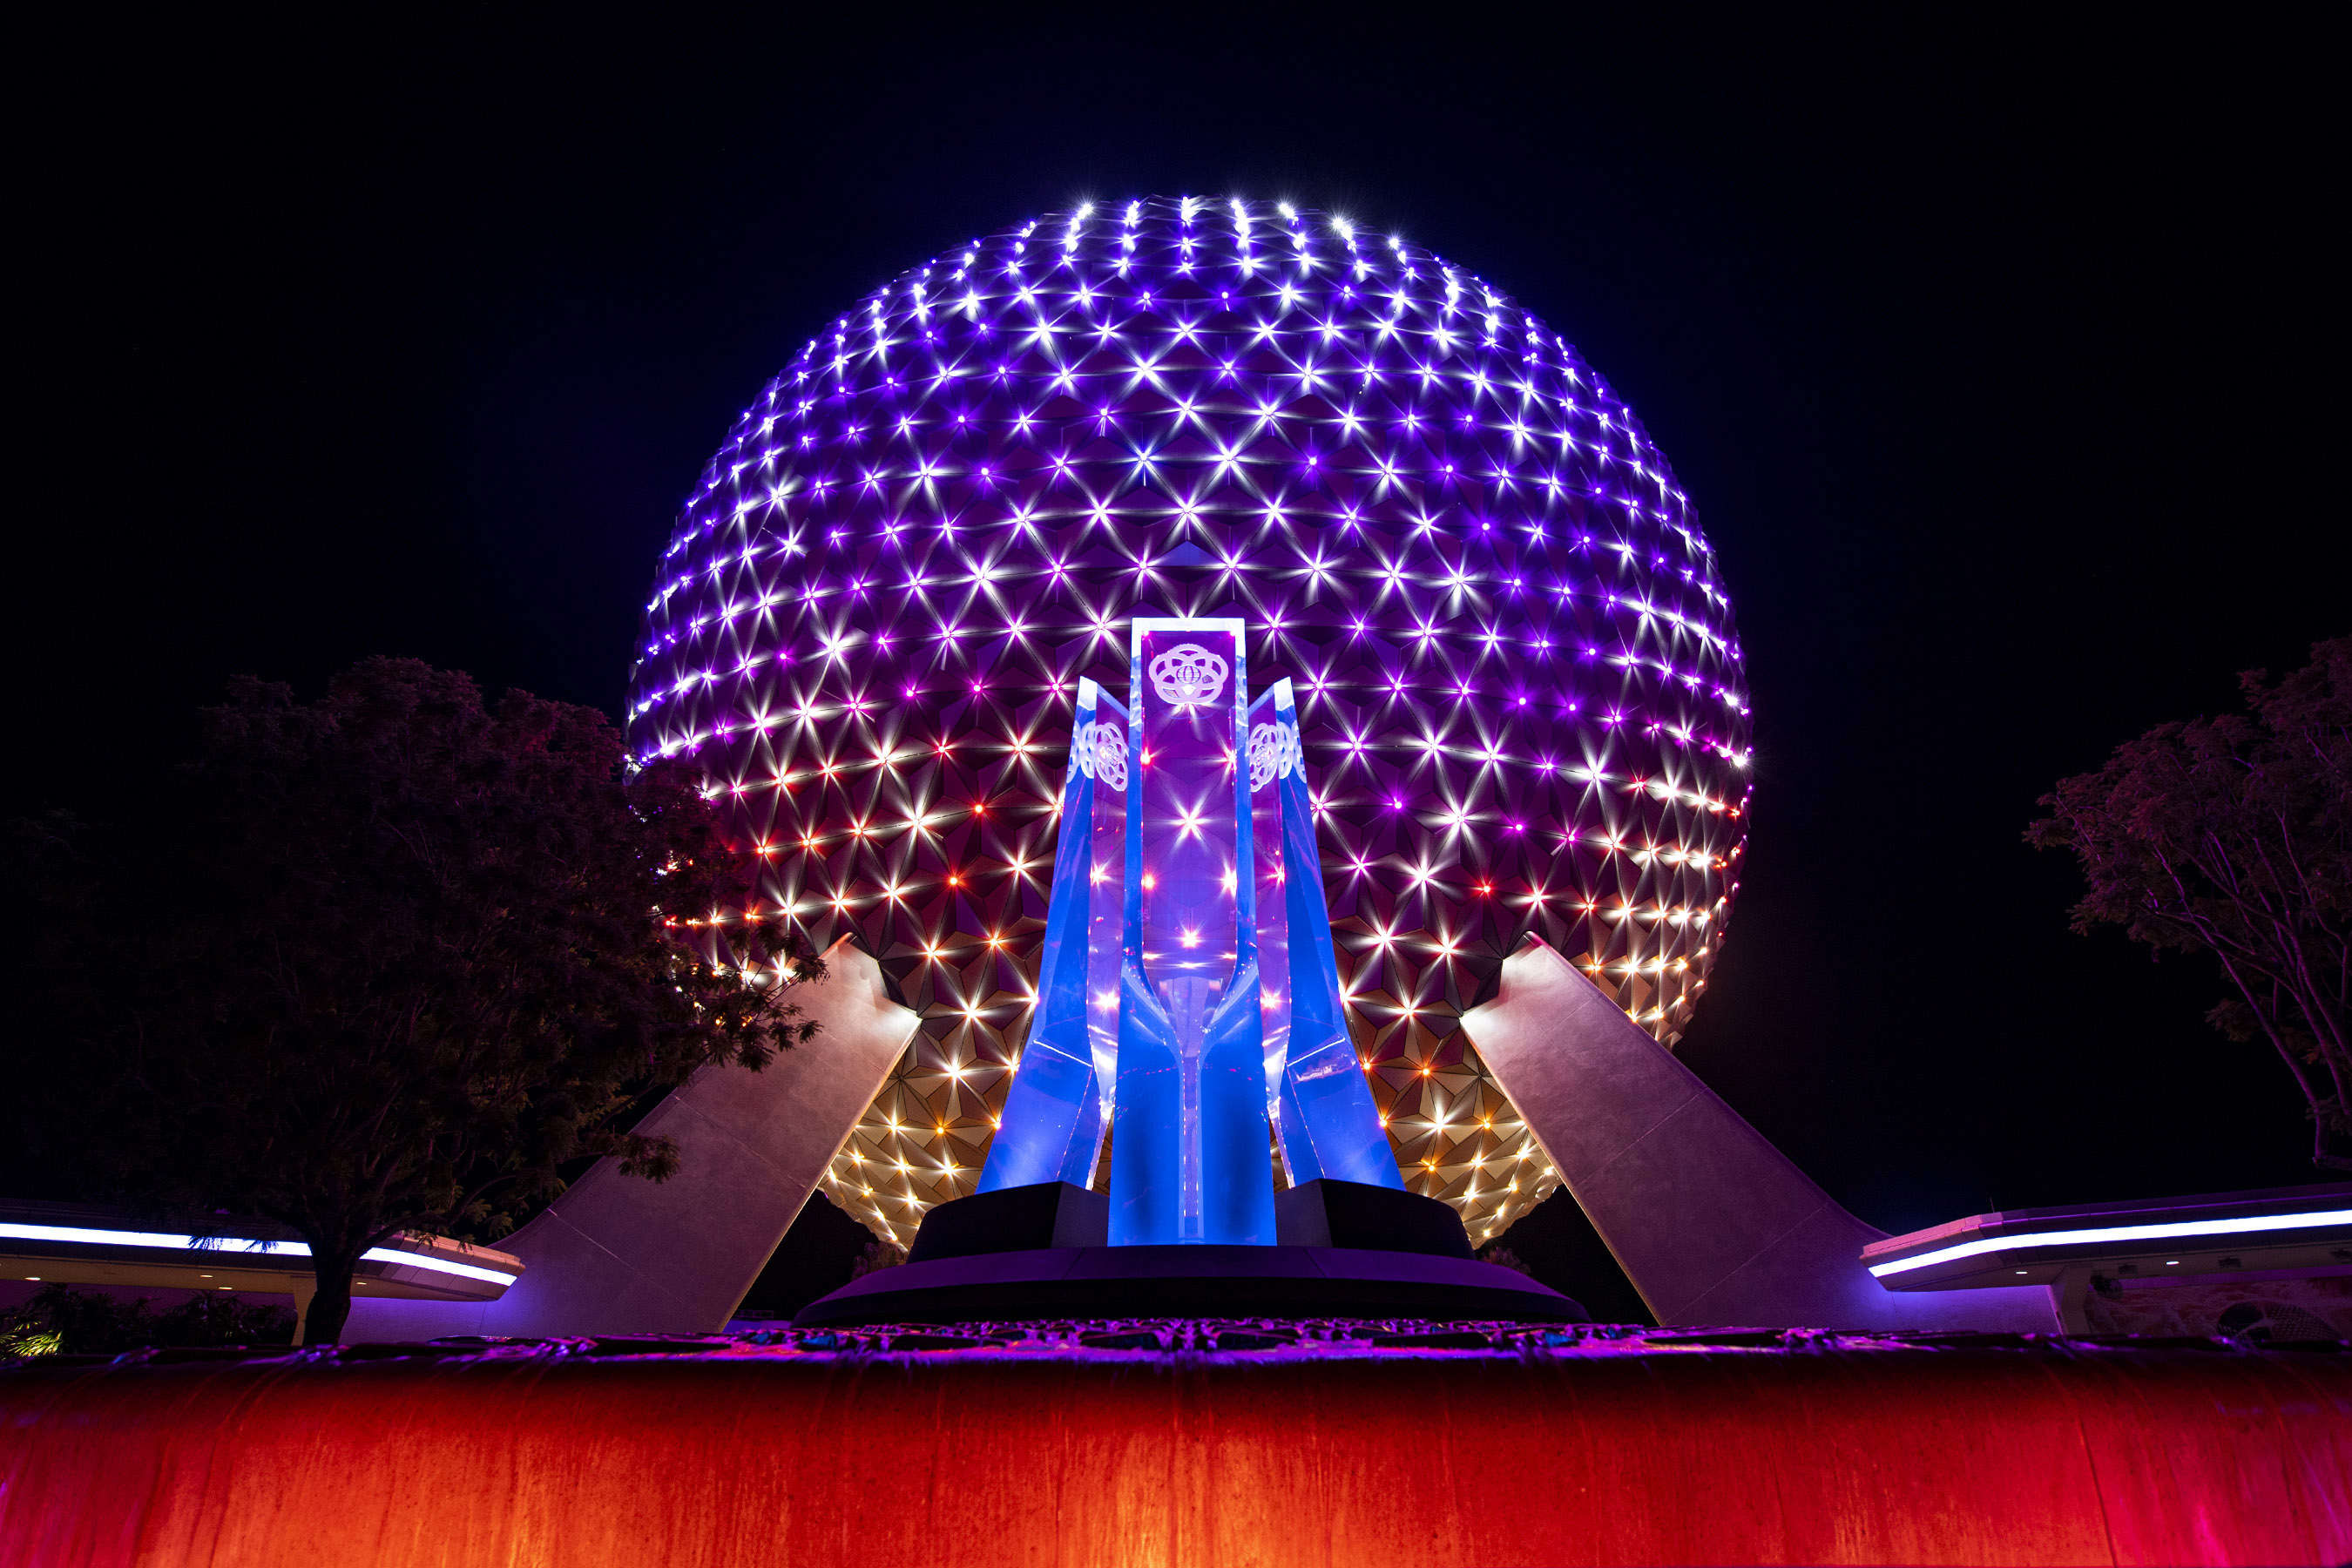 Spaceship Earth, KiteTails & other highlights of Disney World's 50th Anniversary | SYFY WIRE